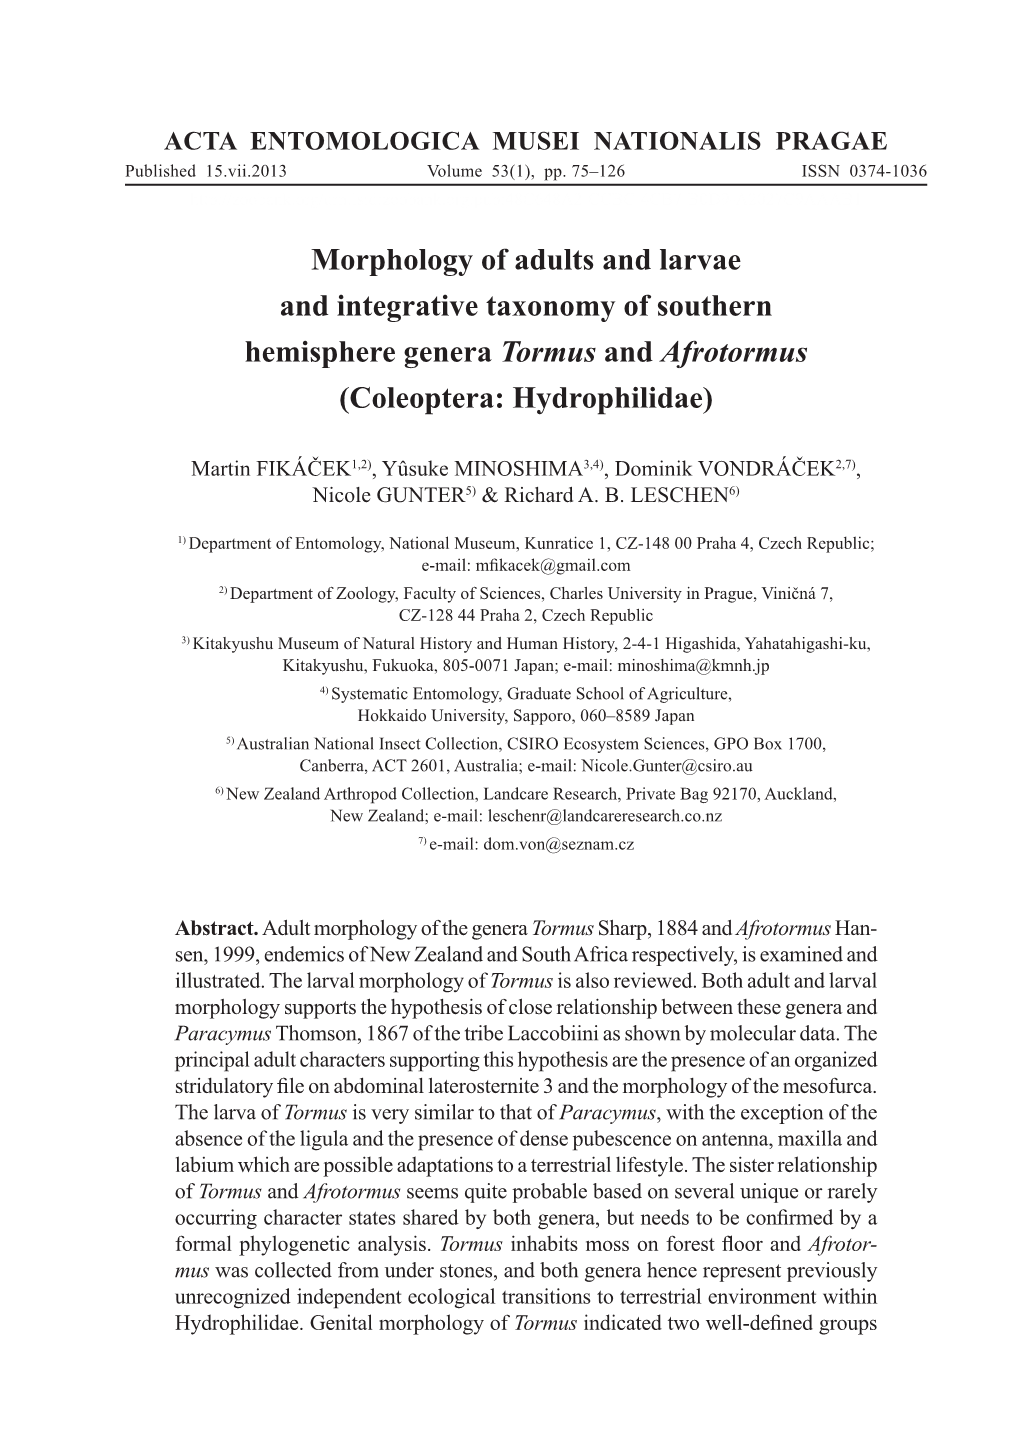 Morphology of Adults and Larvae and Integrative Taxonomy of Southern Hemisphere Genera Tormus and Afrotormus (Coleoptera: Hydrophilidae)